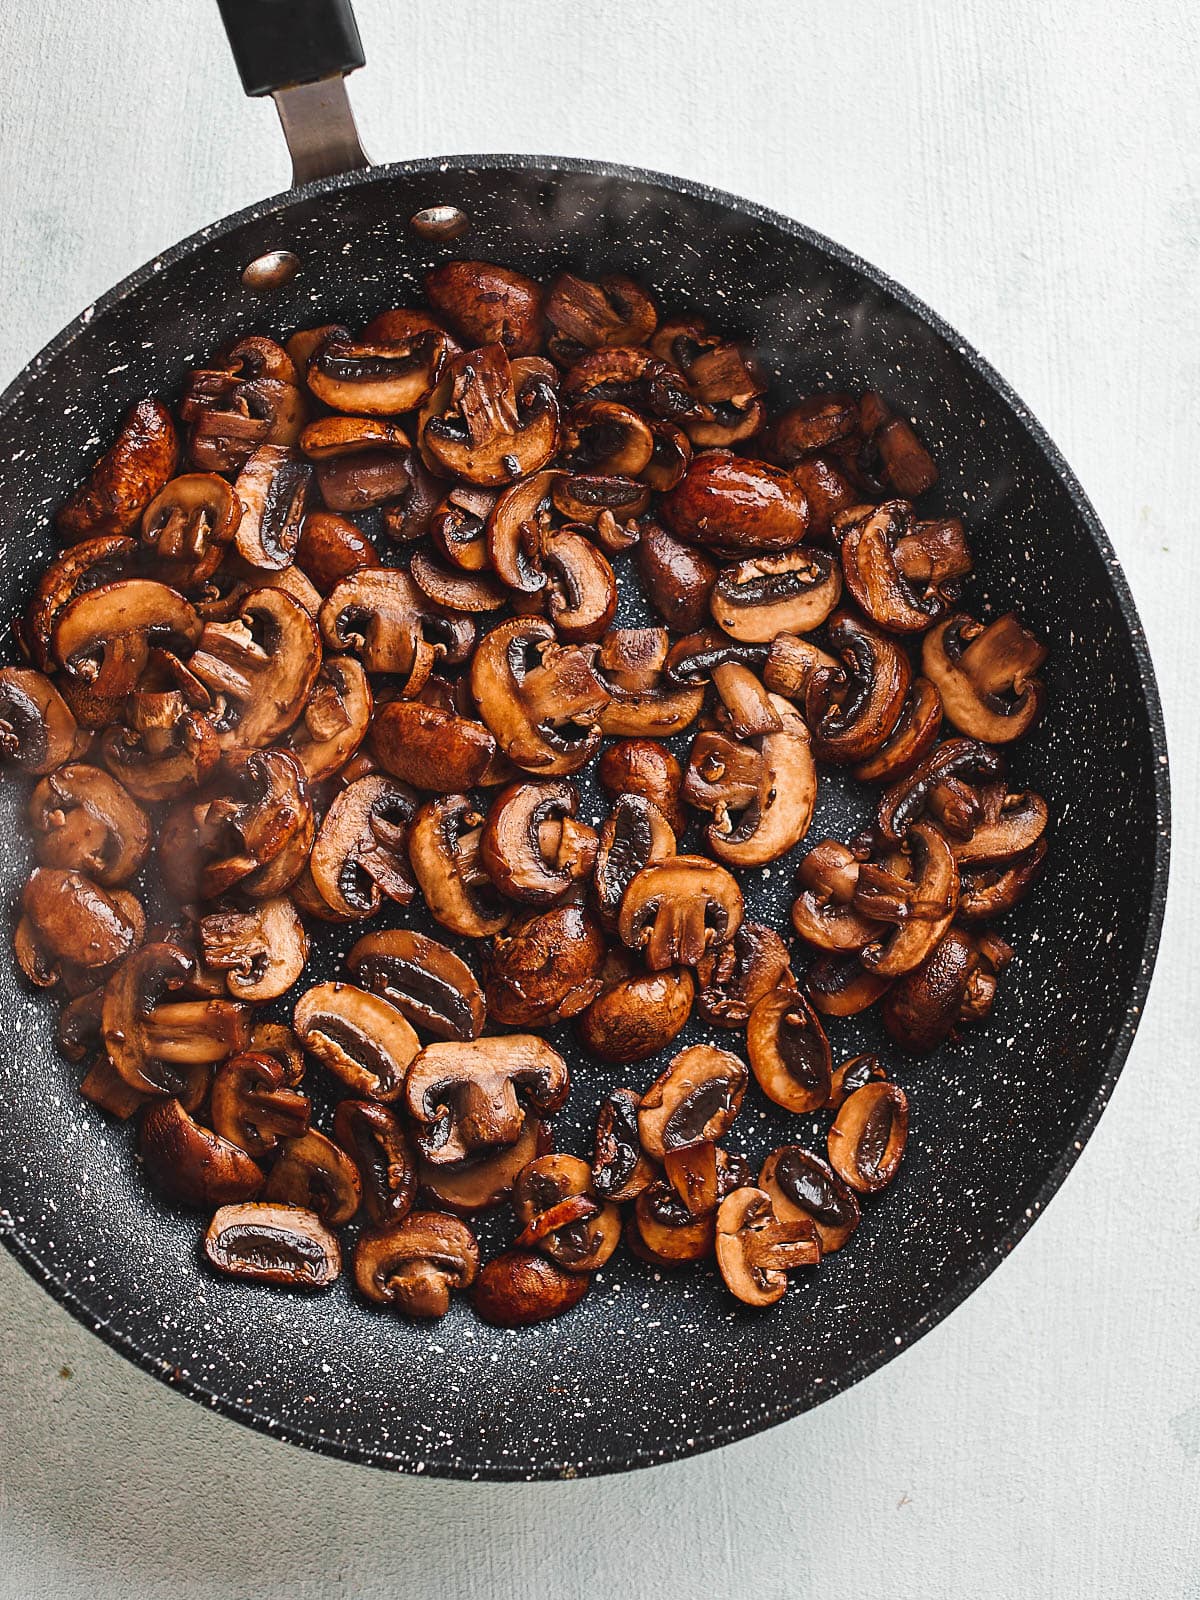 Mushrooms in frying pan once cooked down and dry